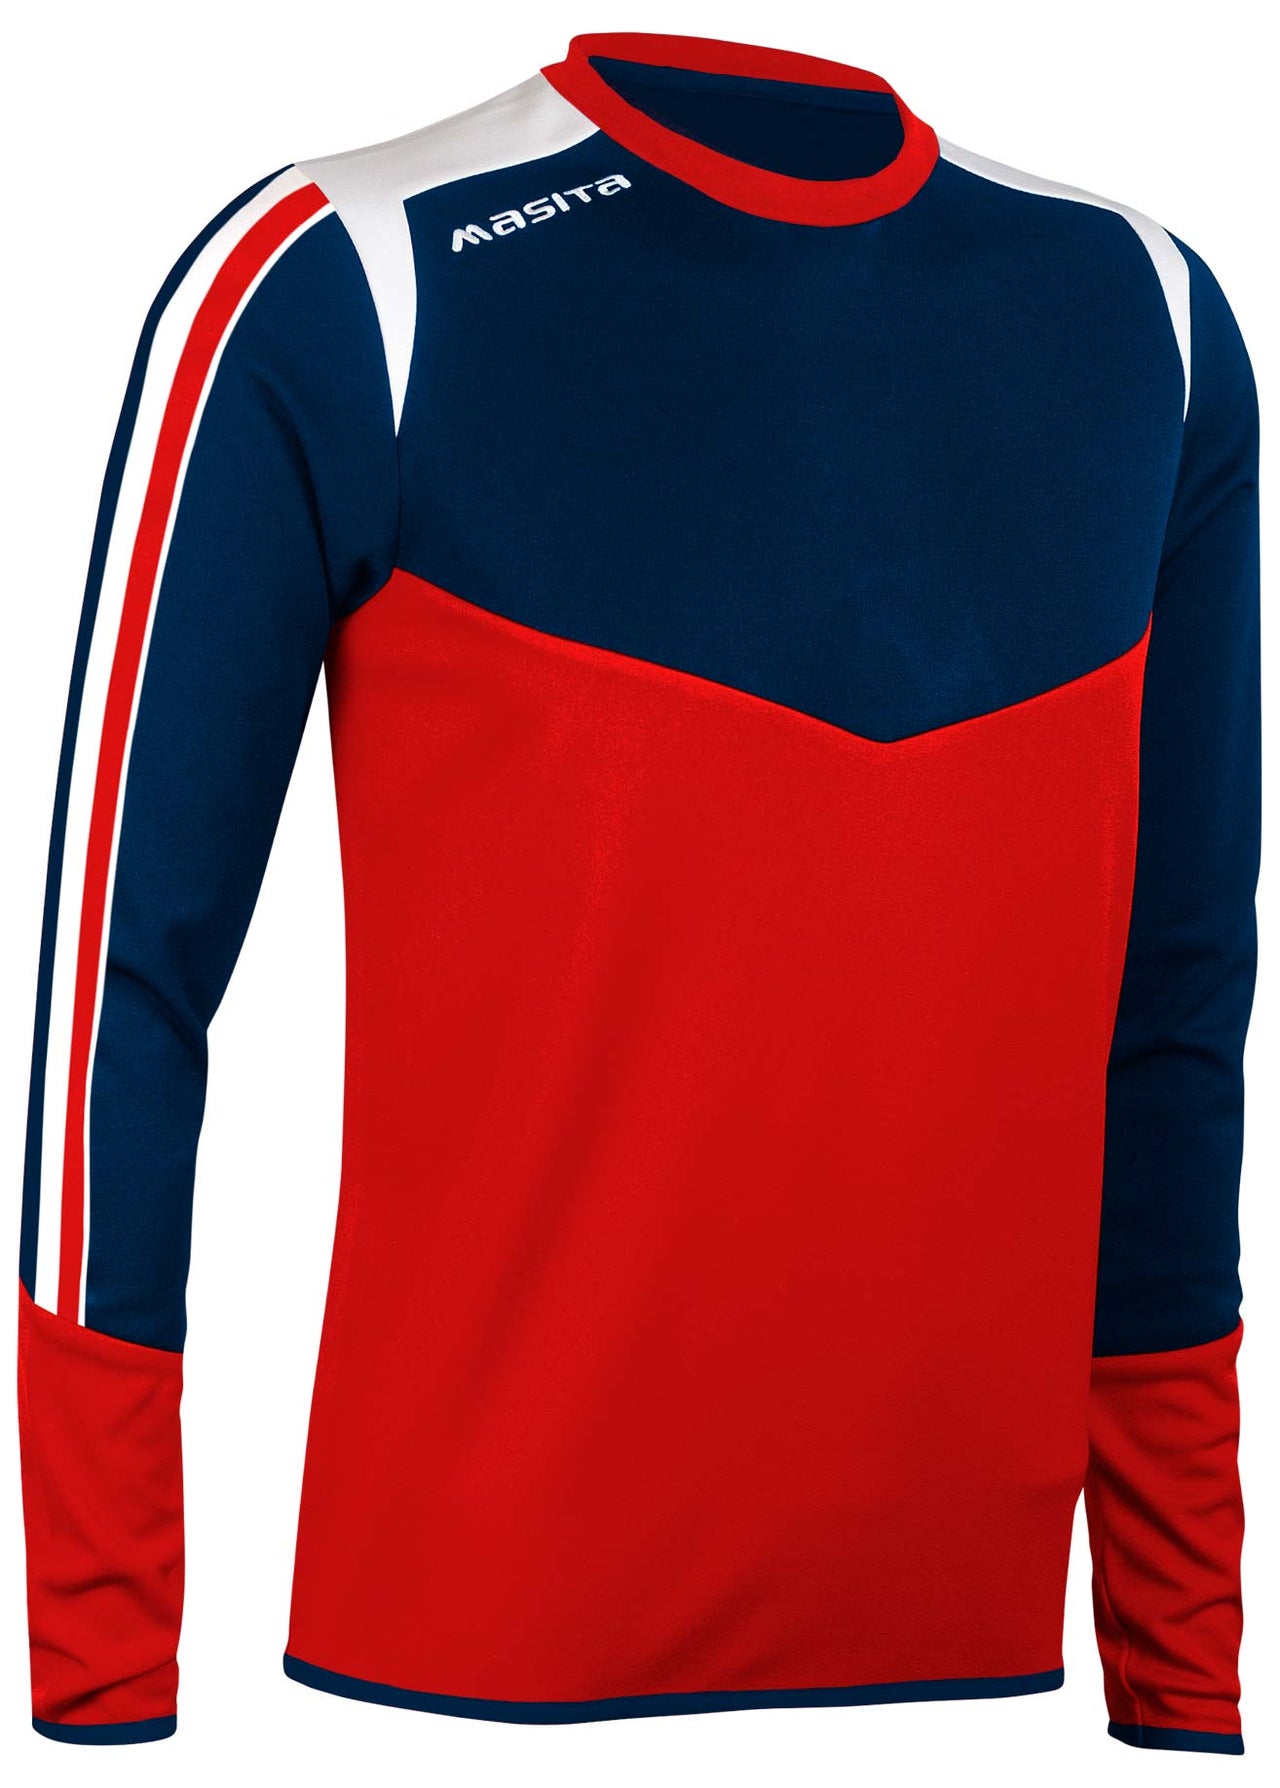 Montana Sweater Red/Navy/White Adult